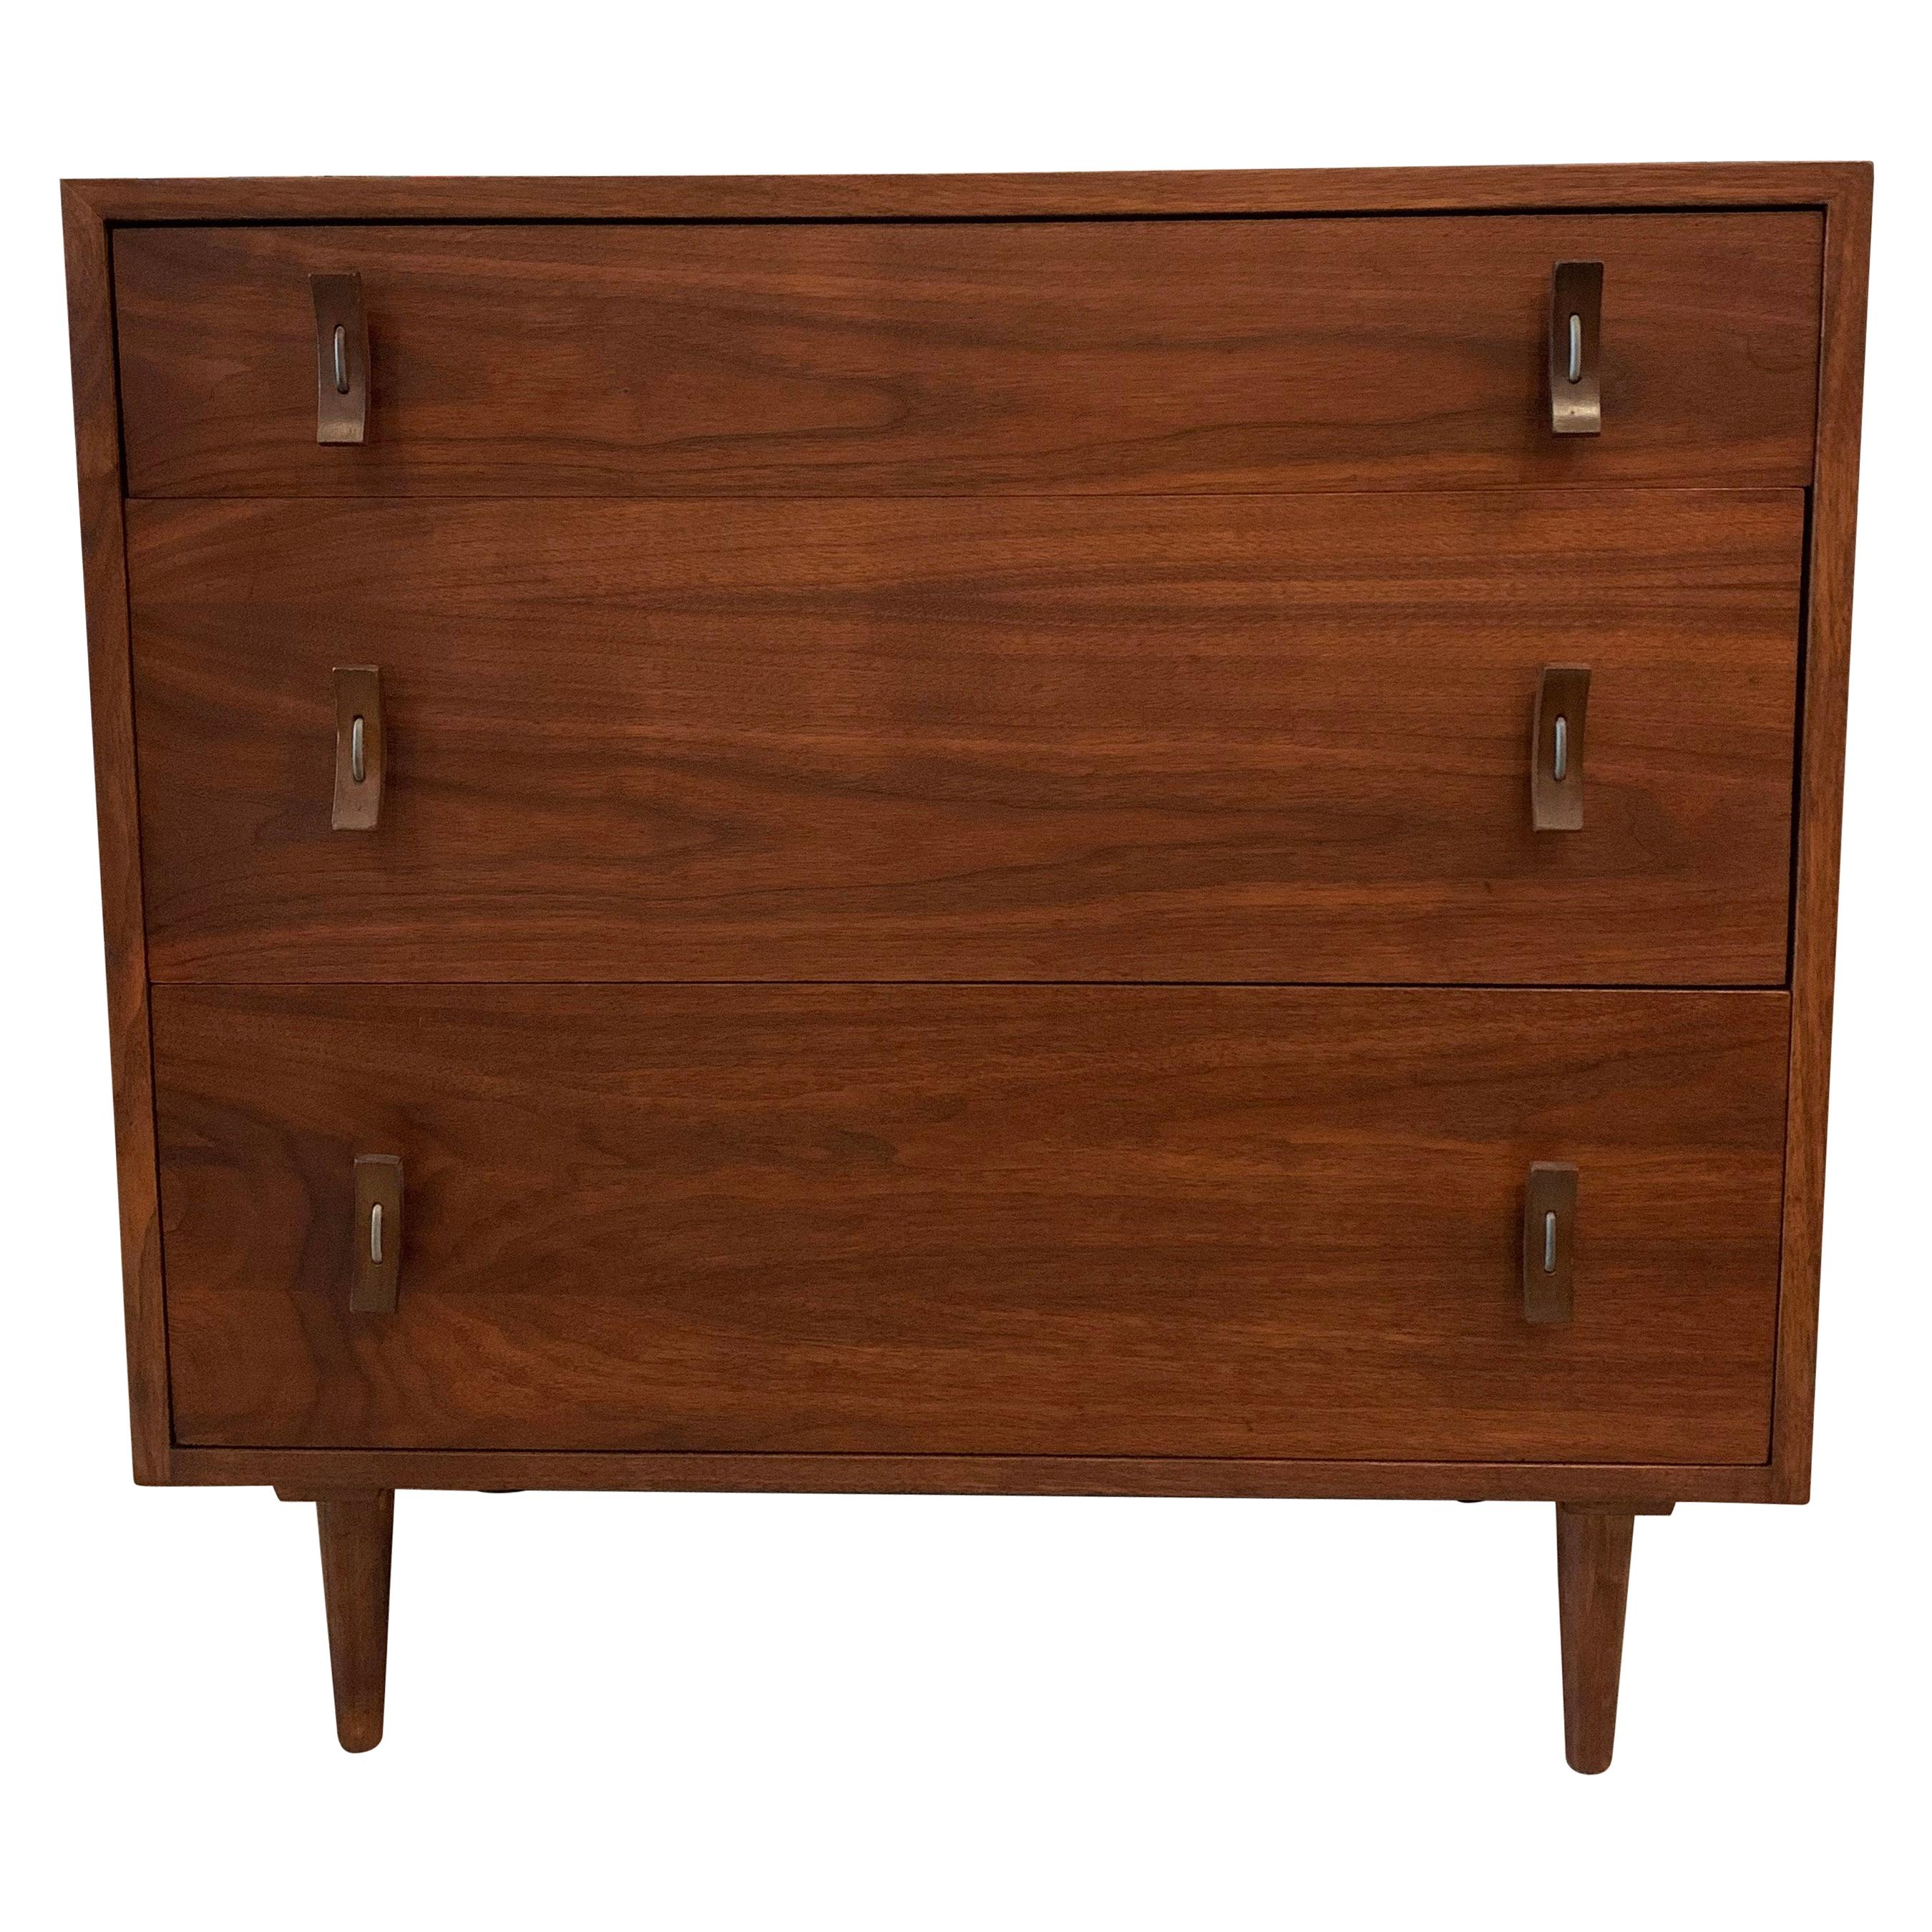 Mid-Century Modern Dresser by Stanley Young for Glenn of California